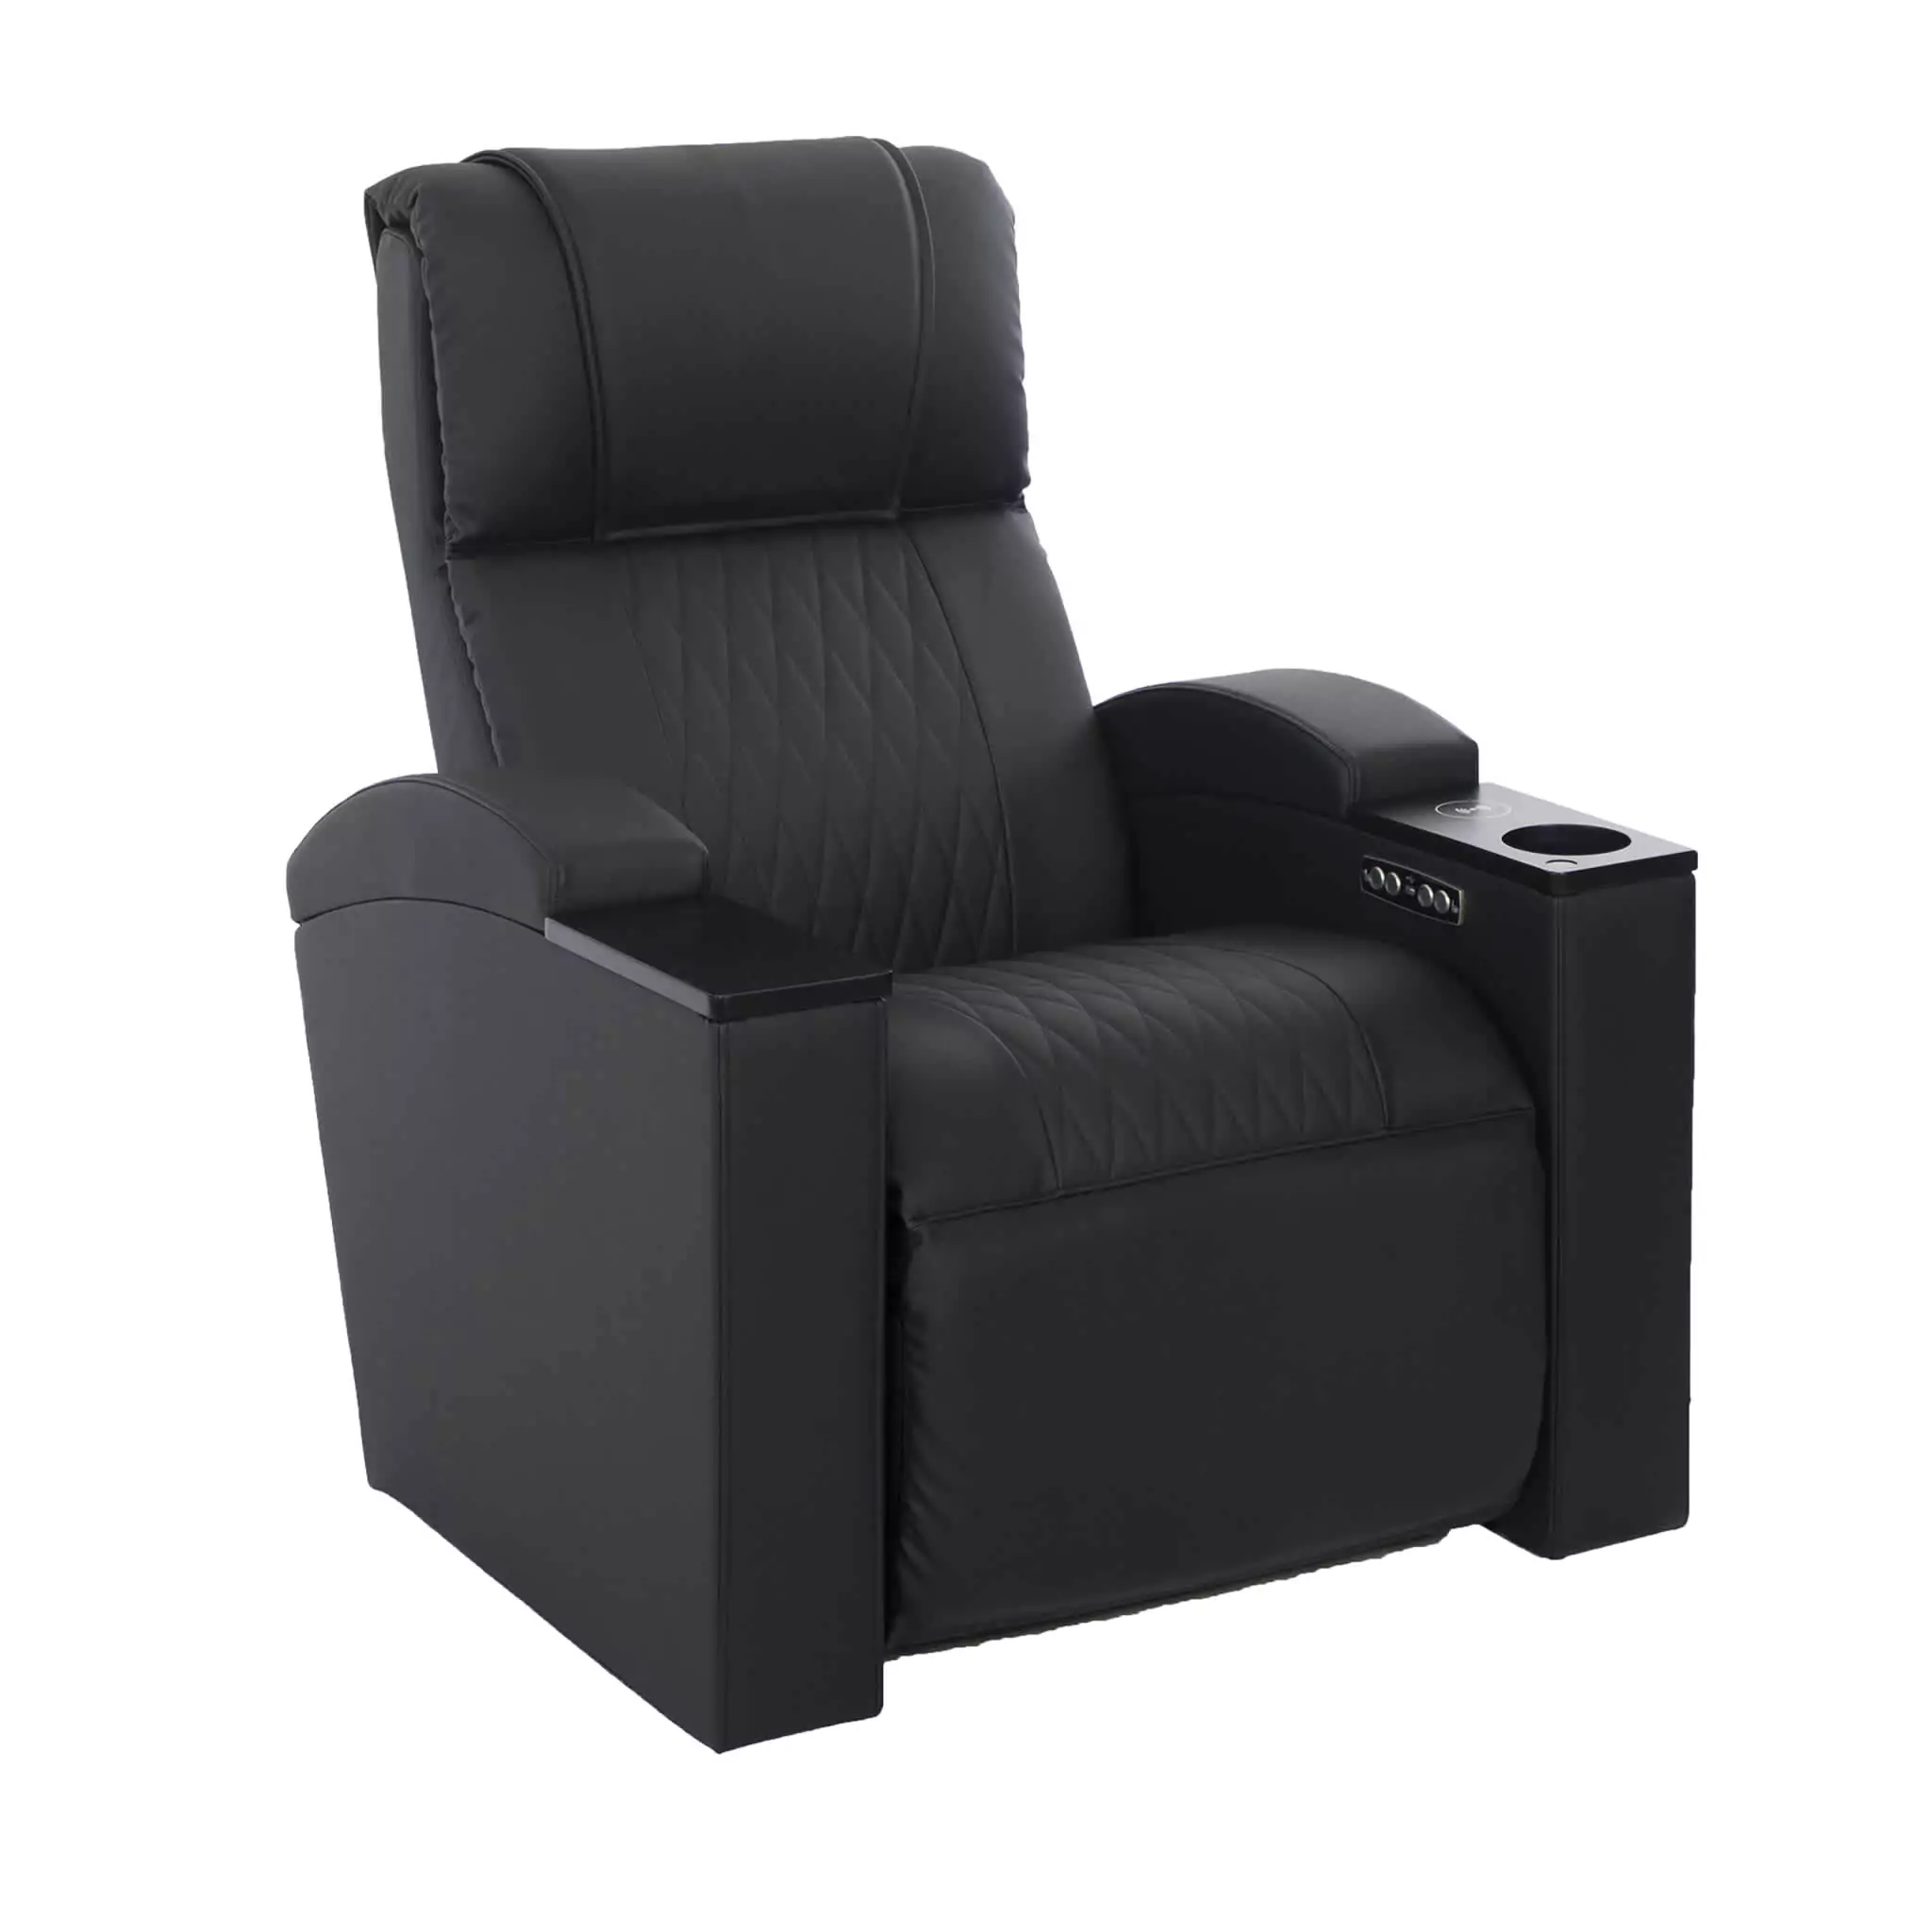 Recliners Image